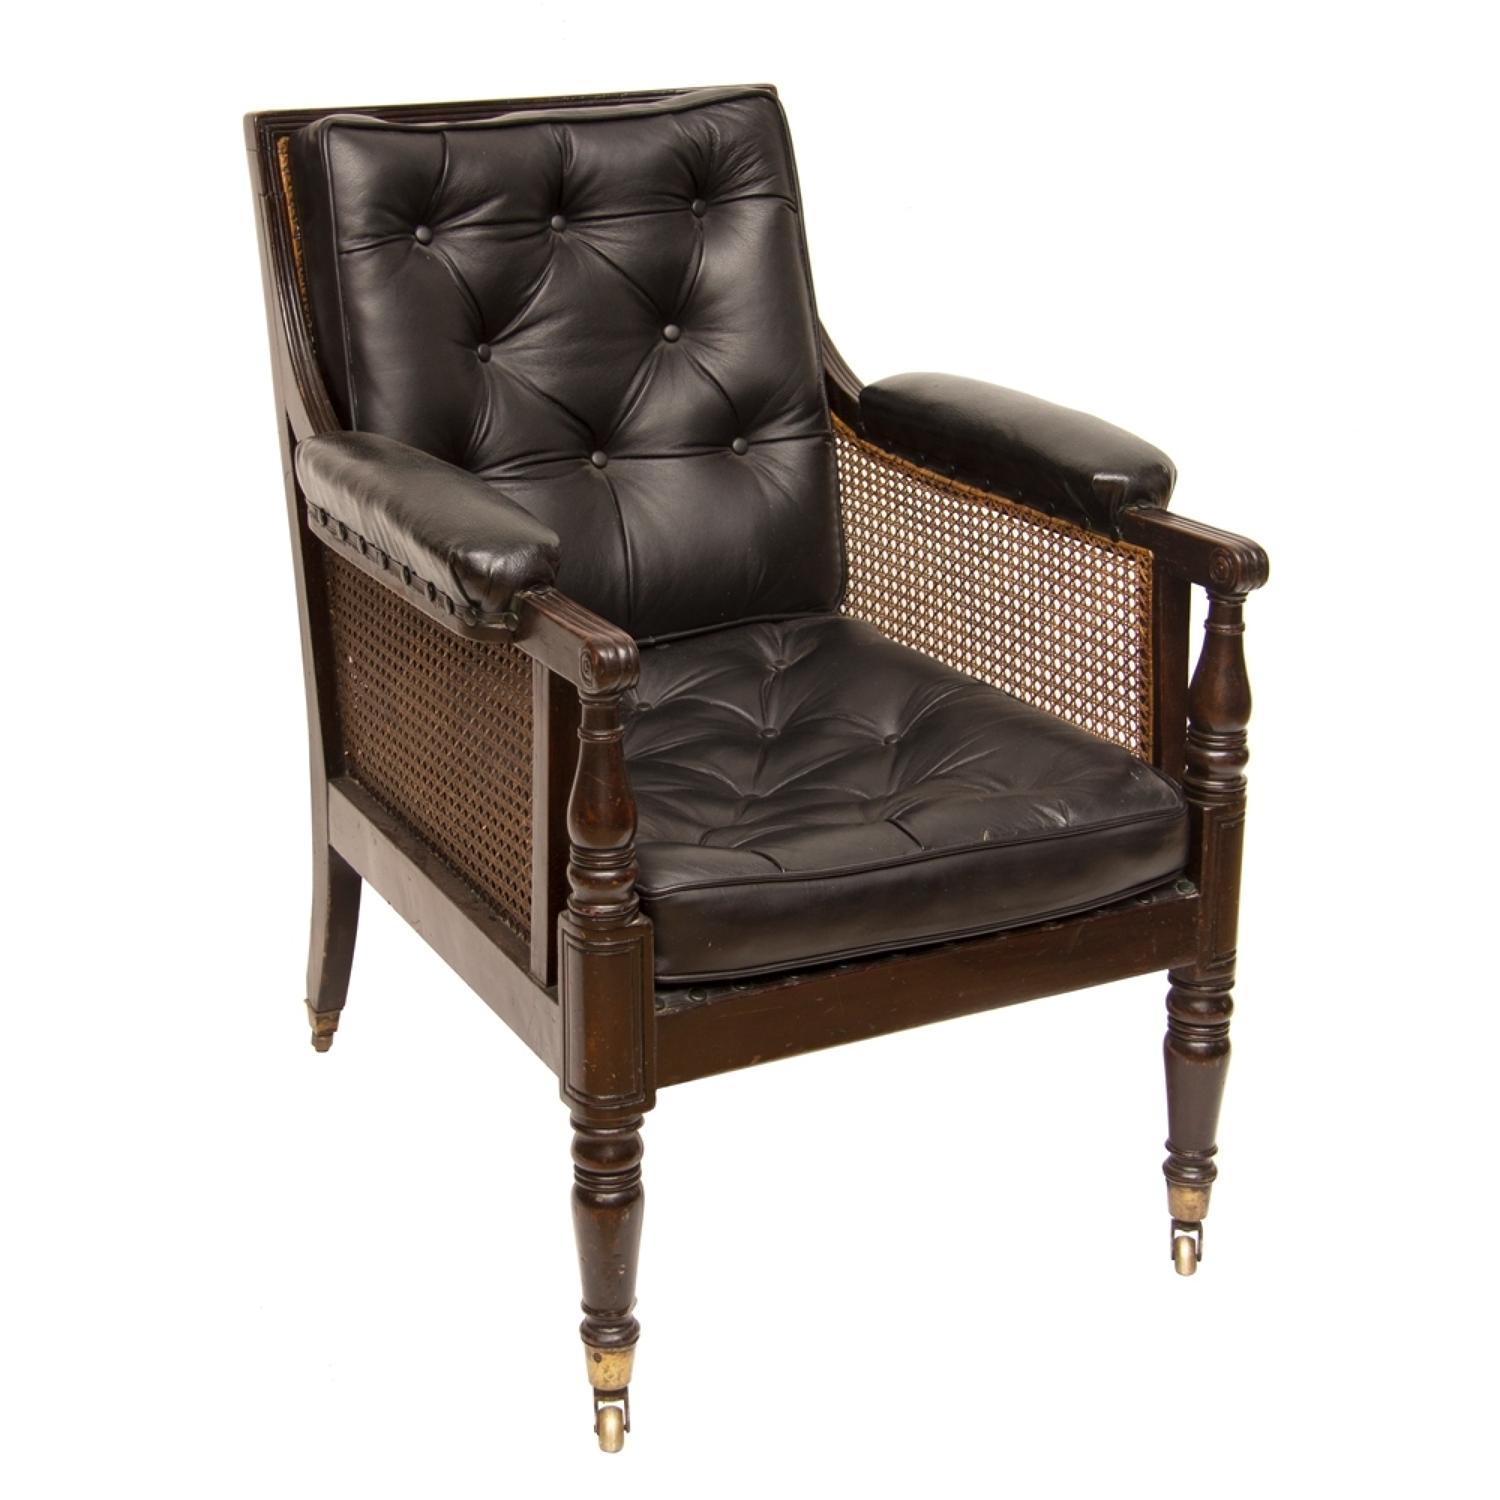 A Bergere Cane Armchair with Leather Back & Cushion c.1840